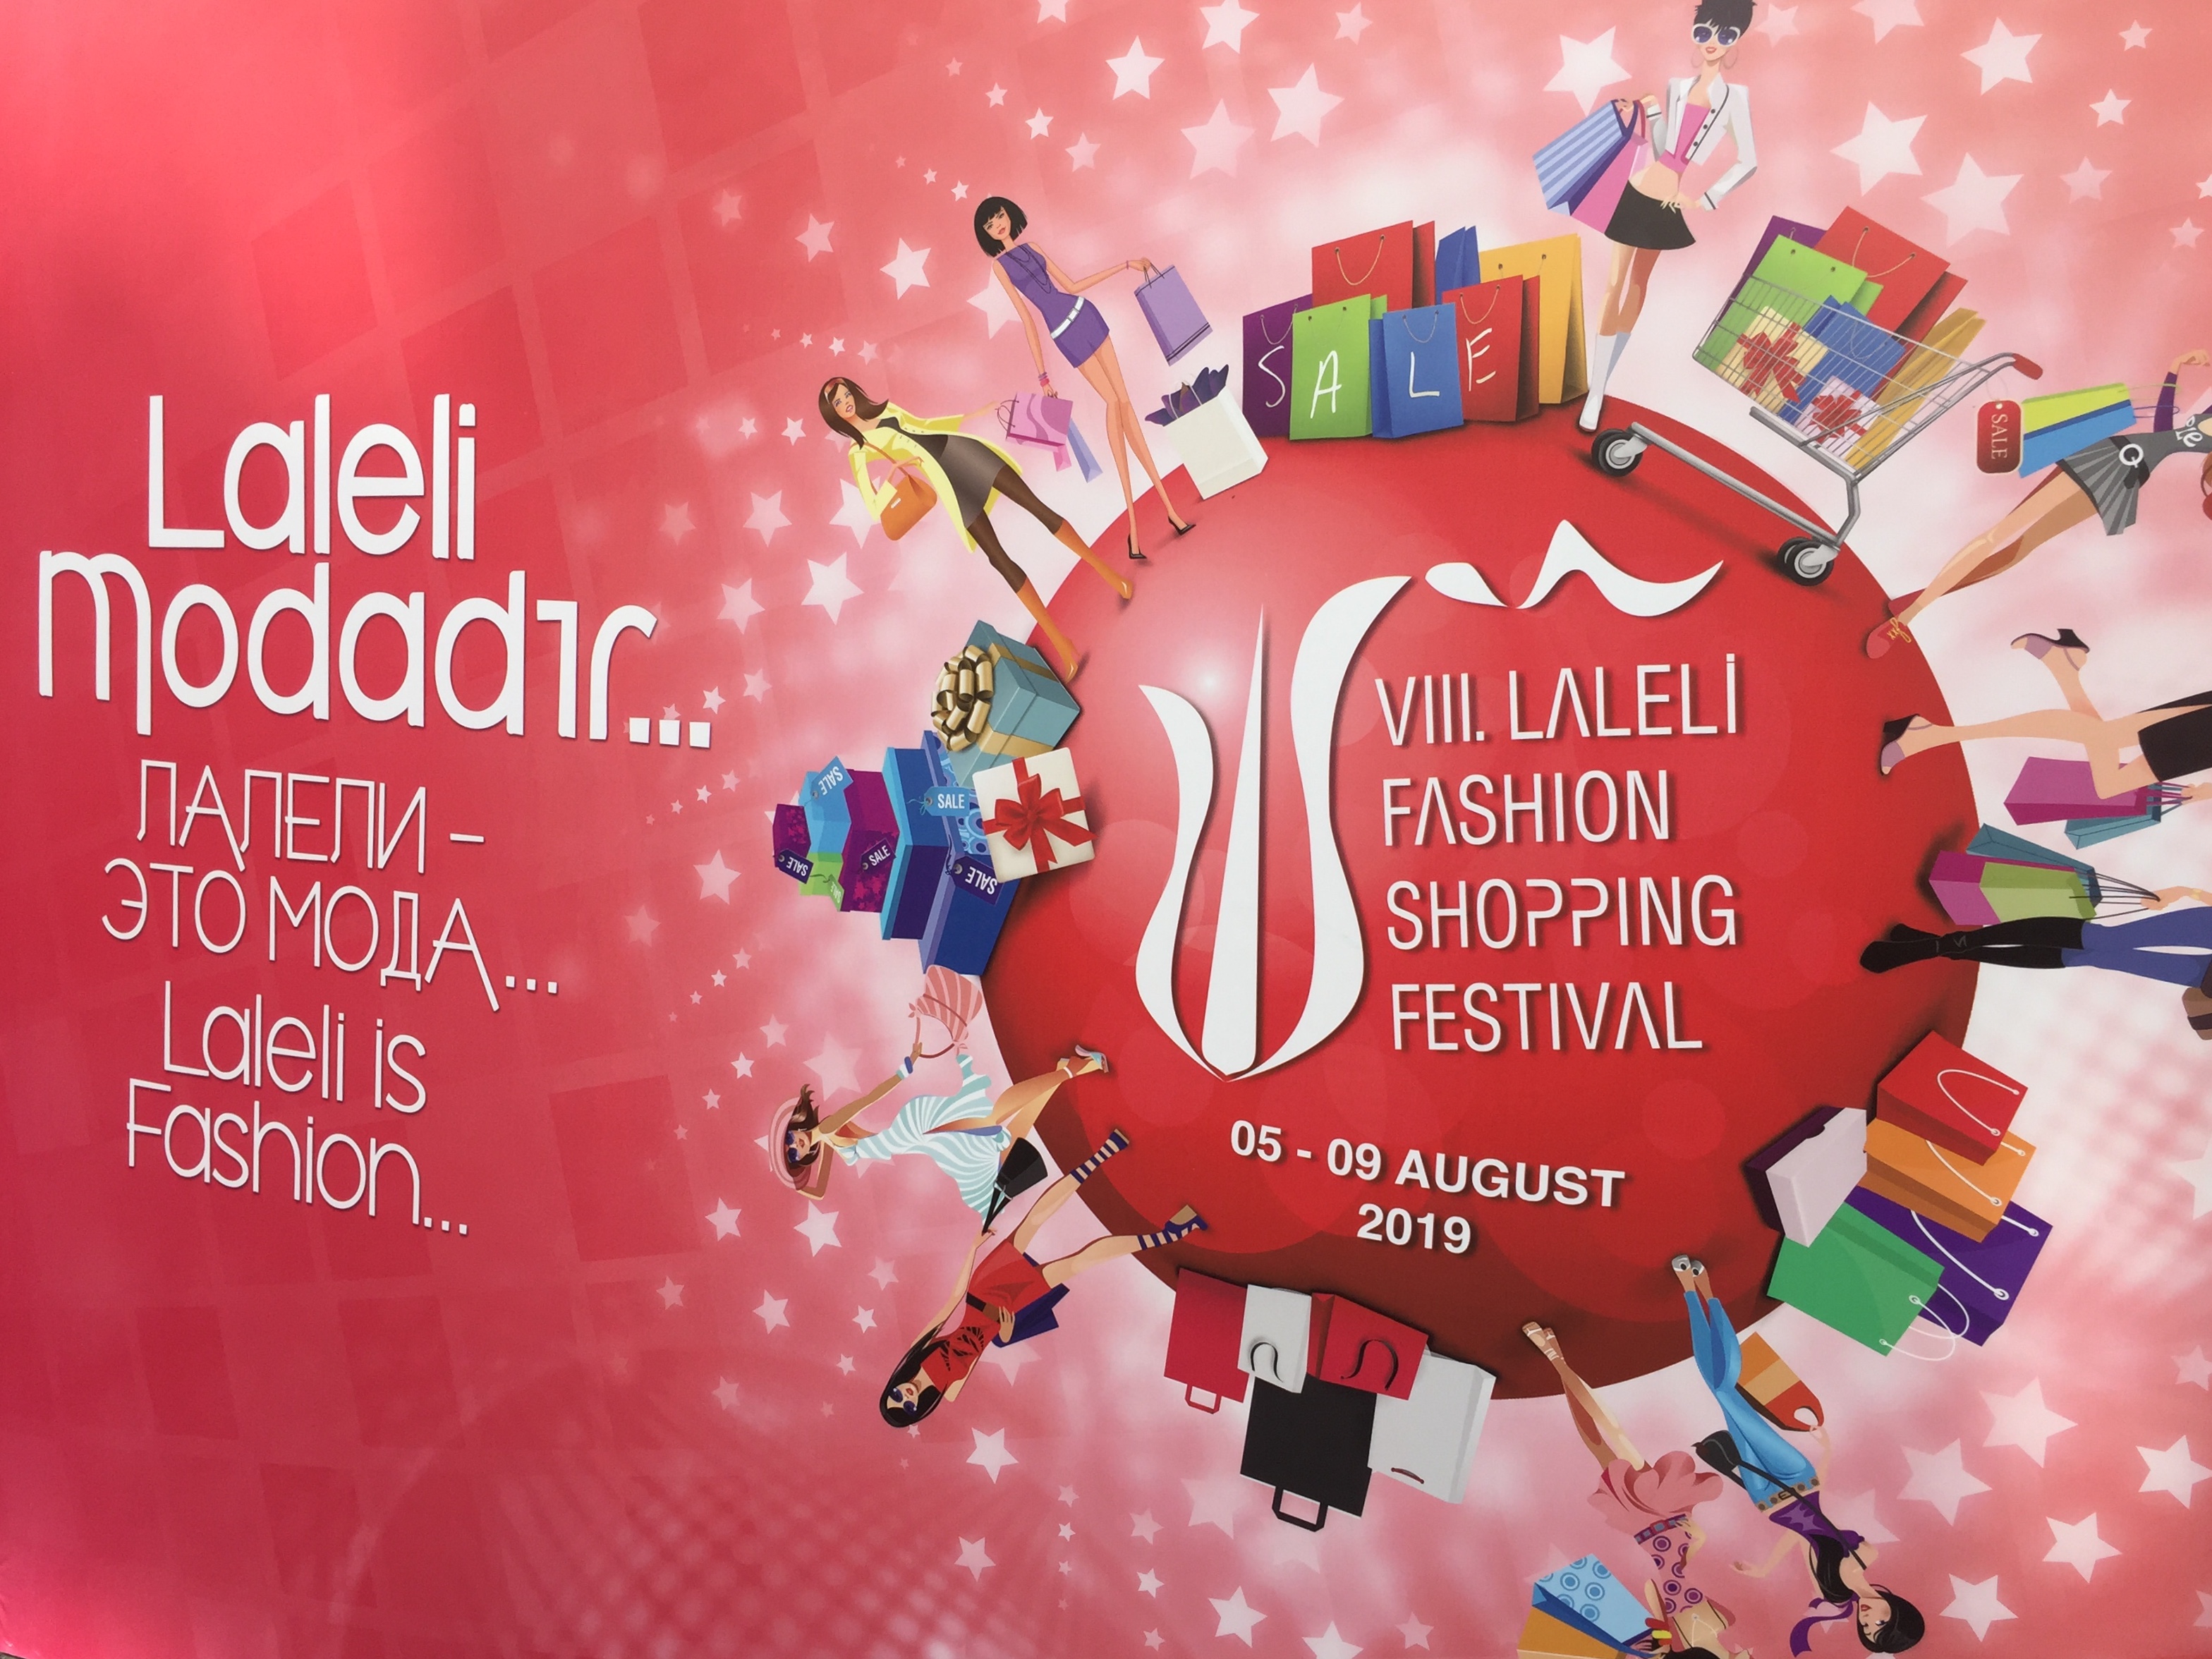 Istanbul Shopping Festival Started in Laleli, 250 Buyers & more than 12